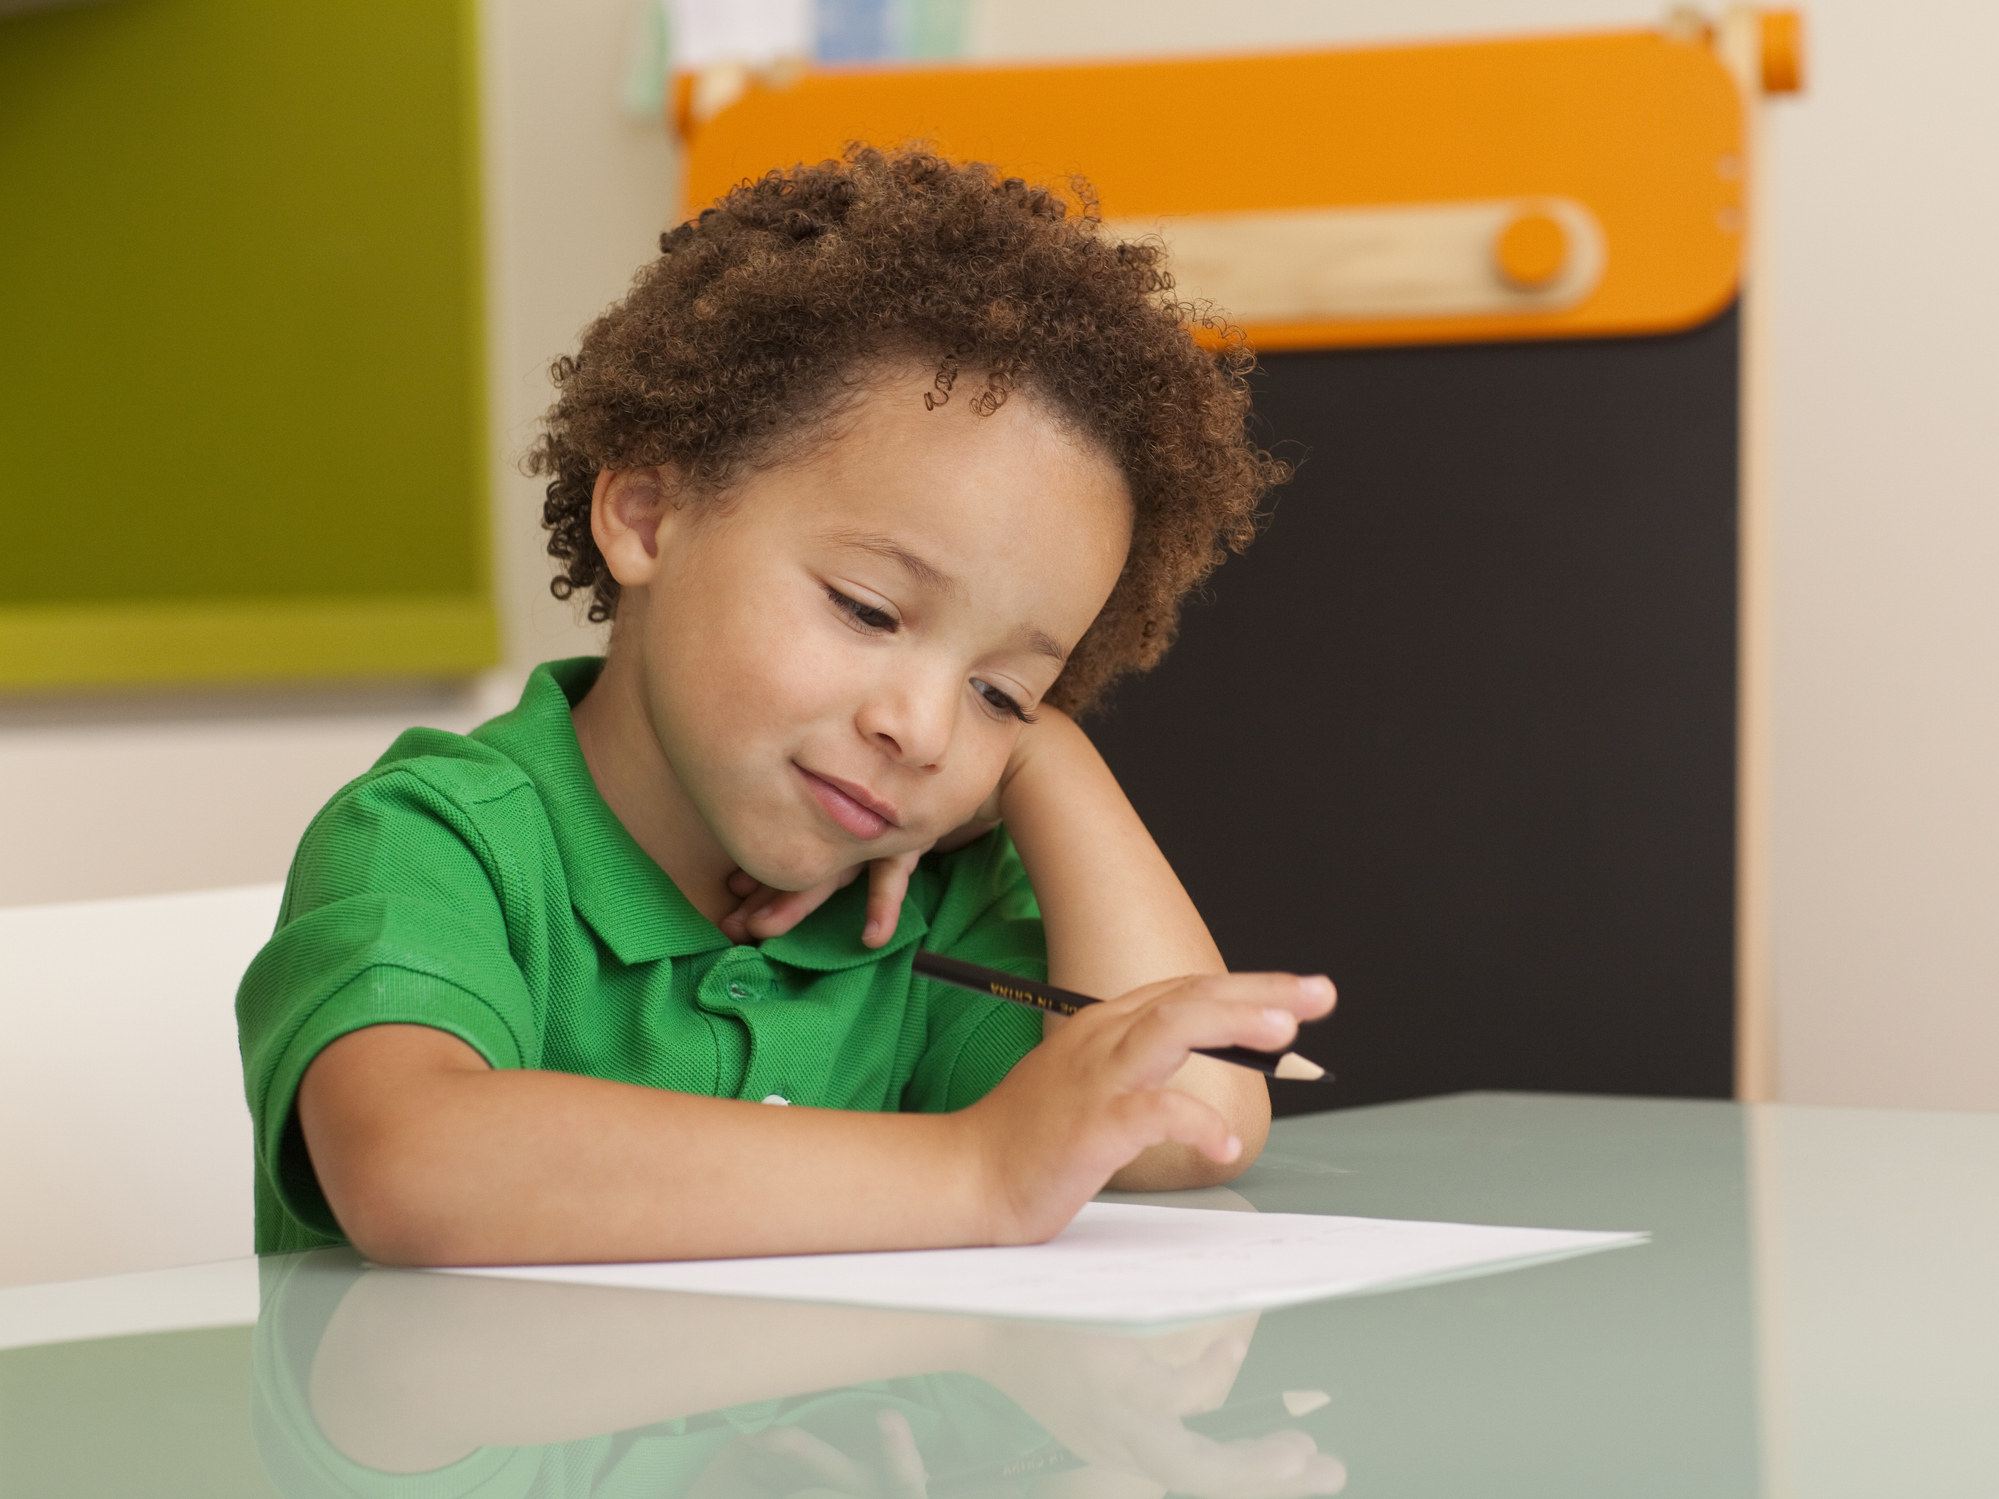 A small child sitting at a table with a pencil and paper